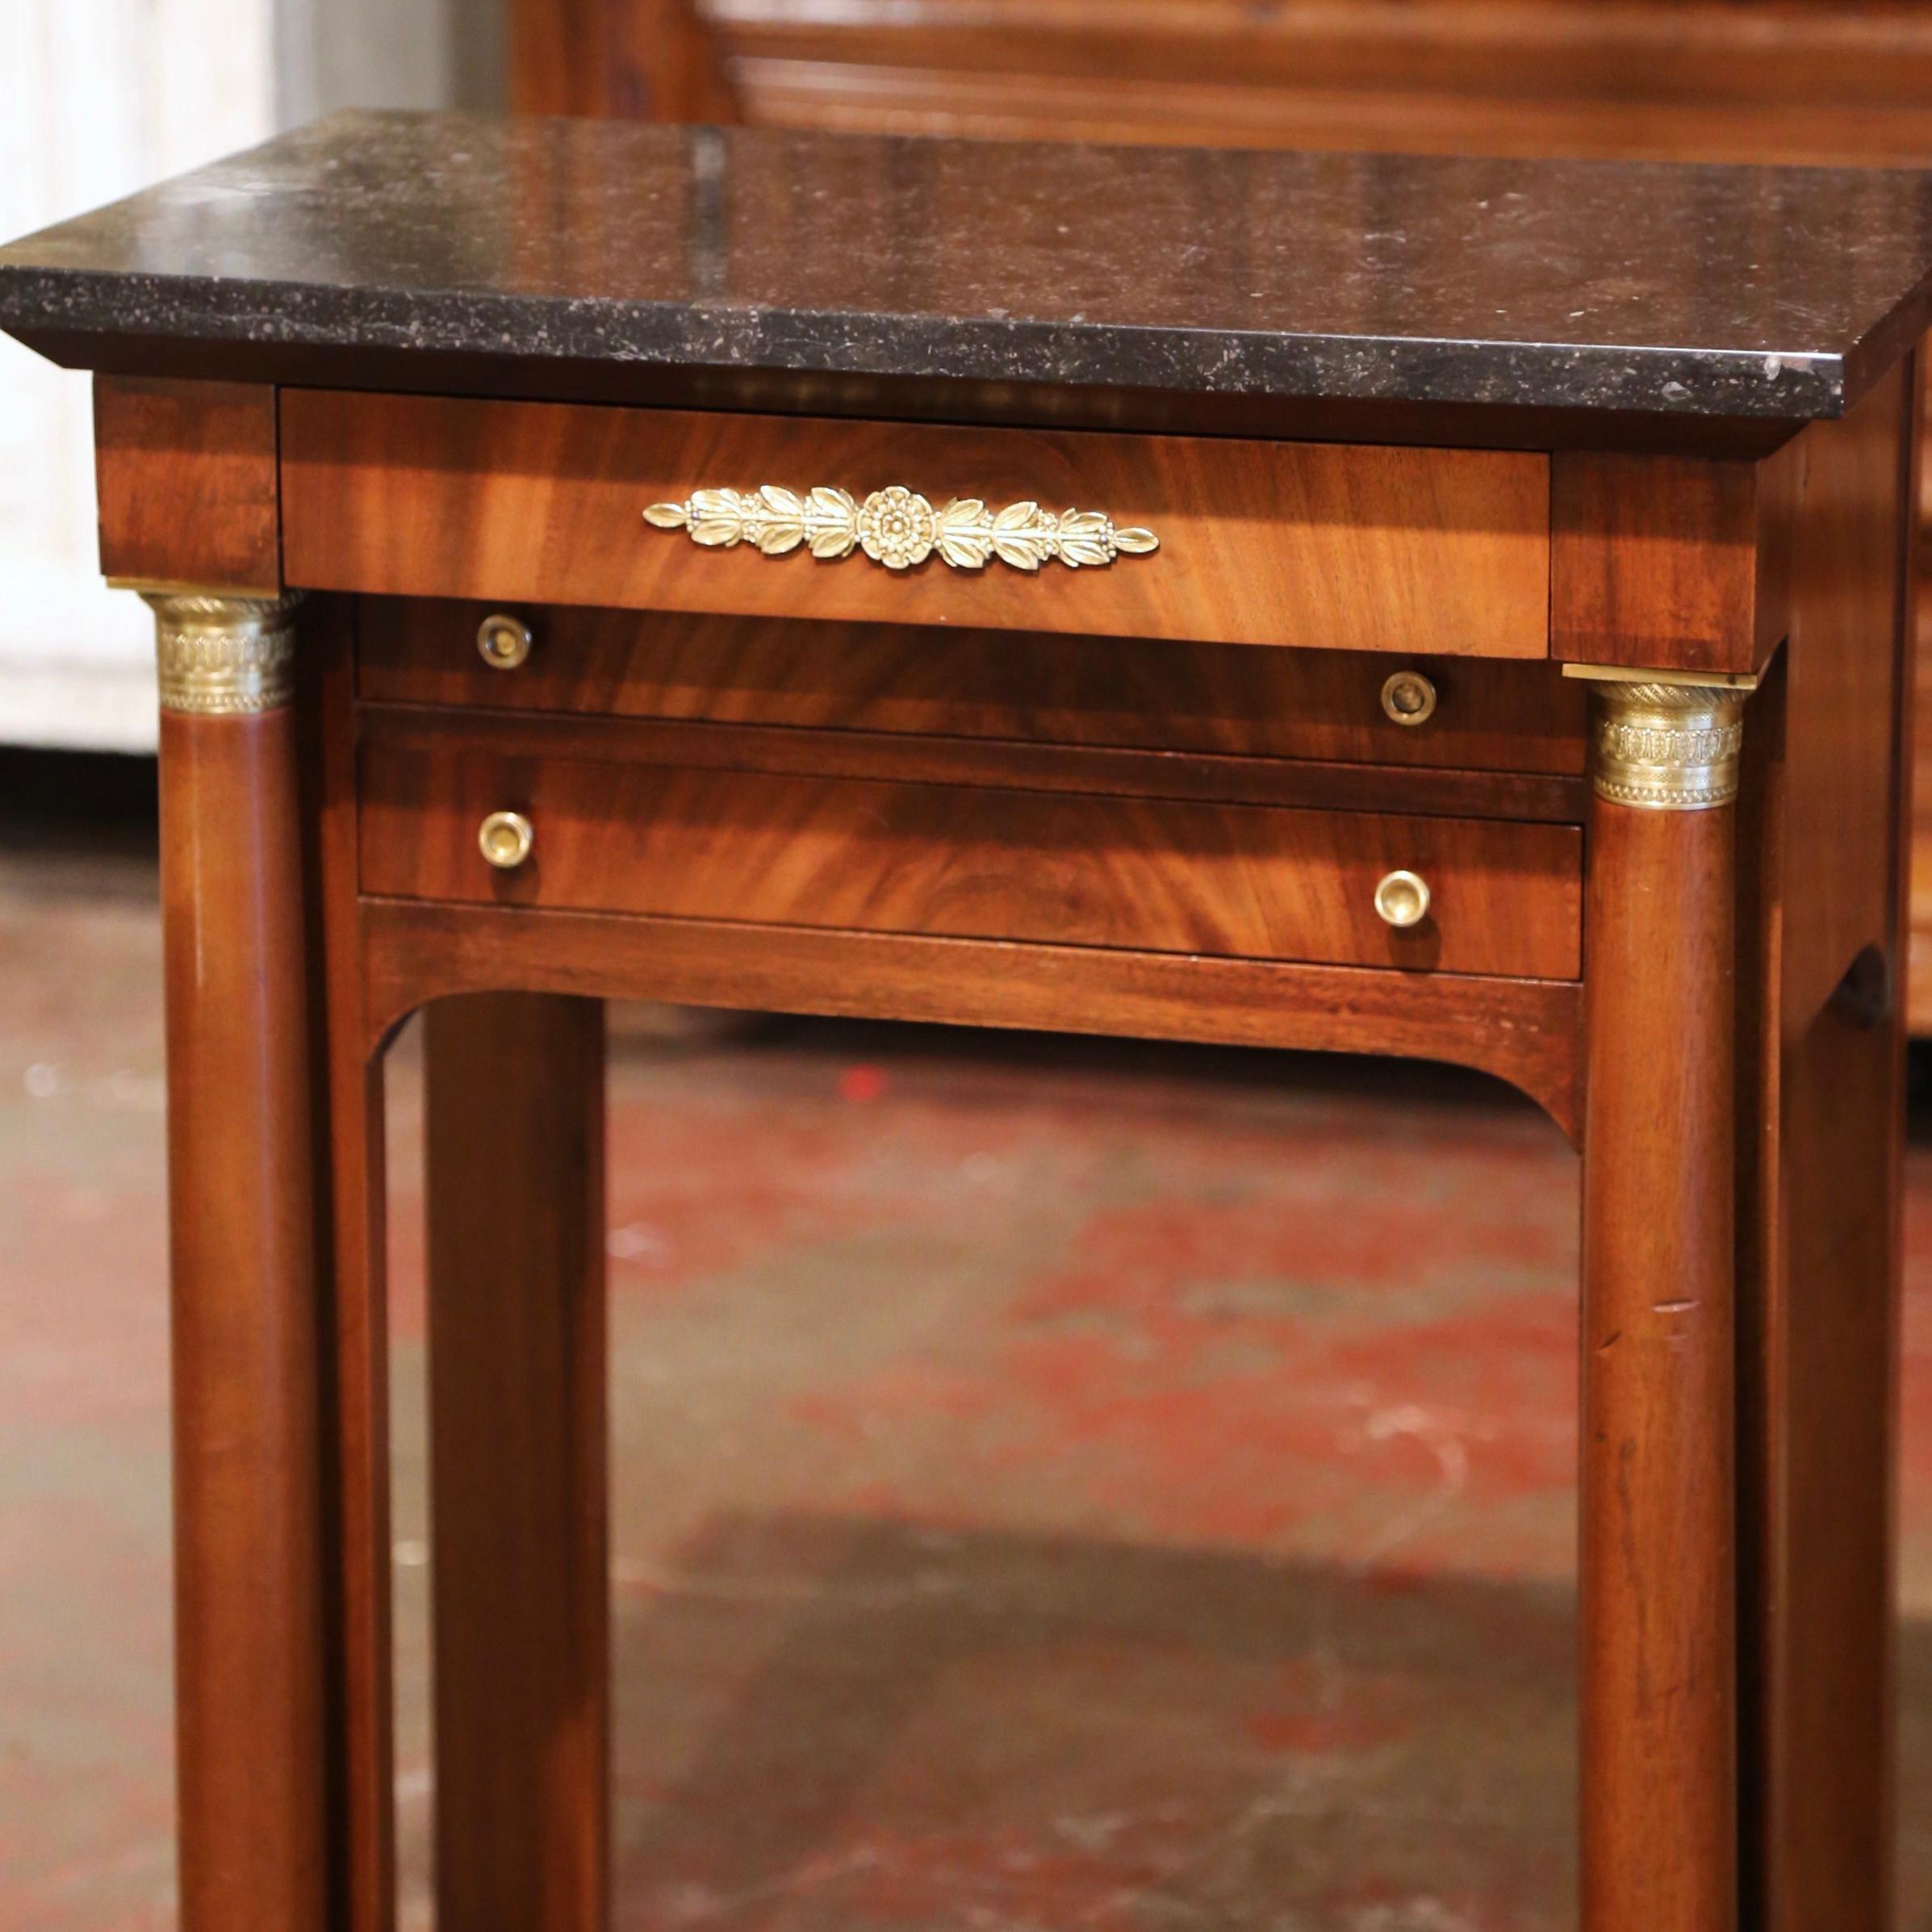 Hand-Crafted Mid-19th Century French Empire Mahogany and Marble Bedside Table with Drawers For Sale